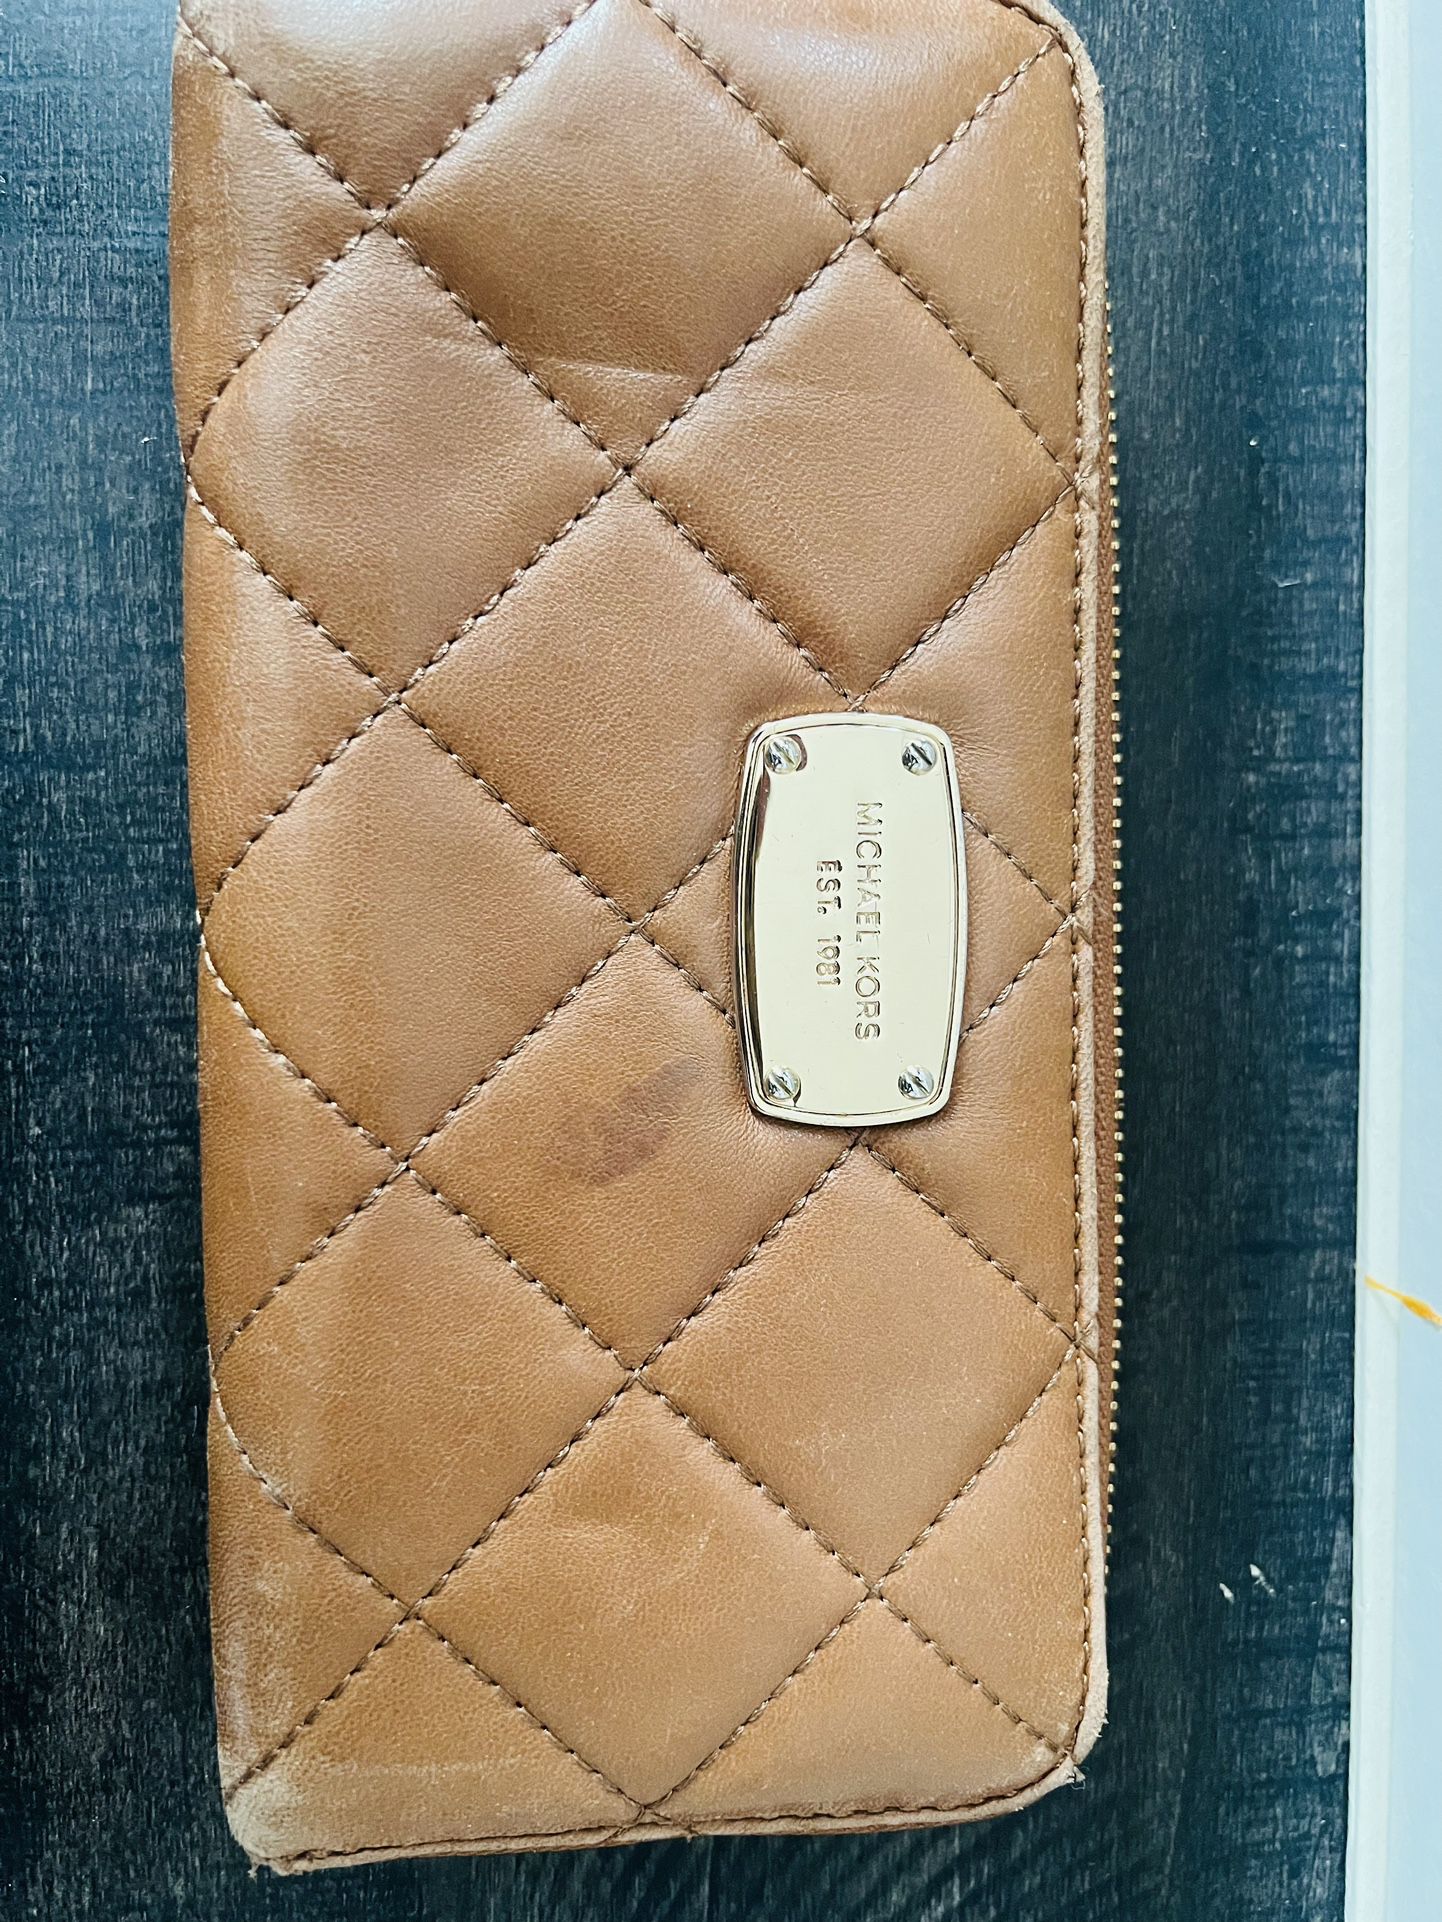 Micheal Kors Wallet for Sale in Moreno Valley, CA - OfferUp